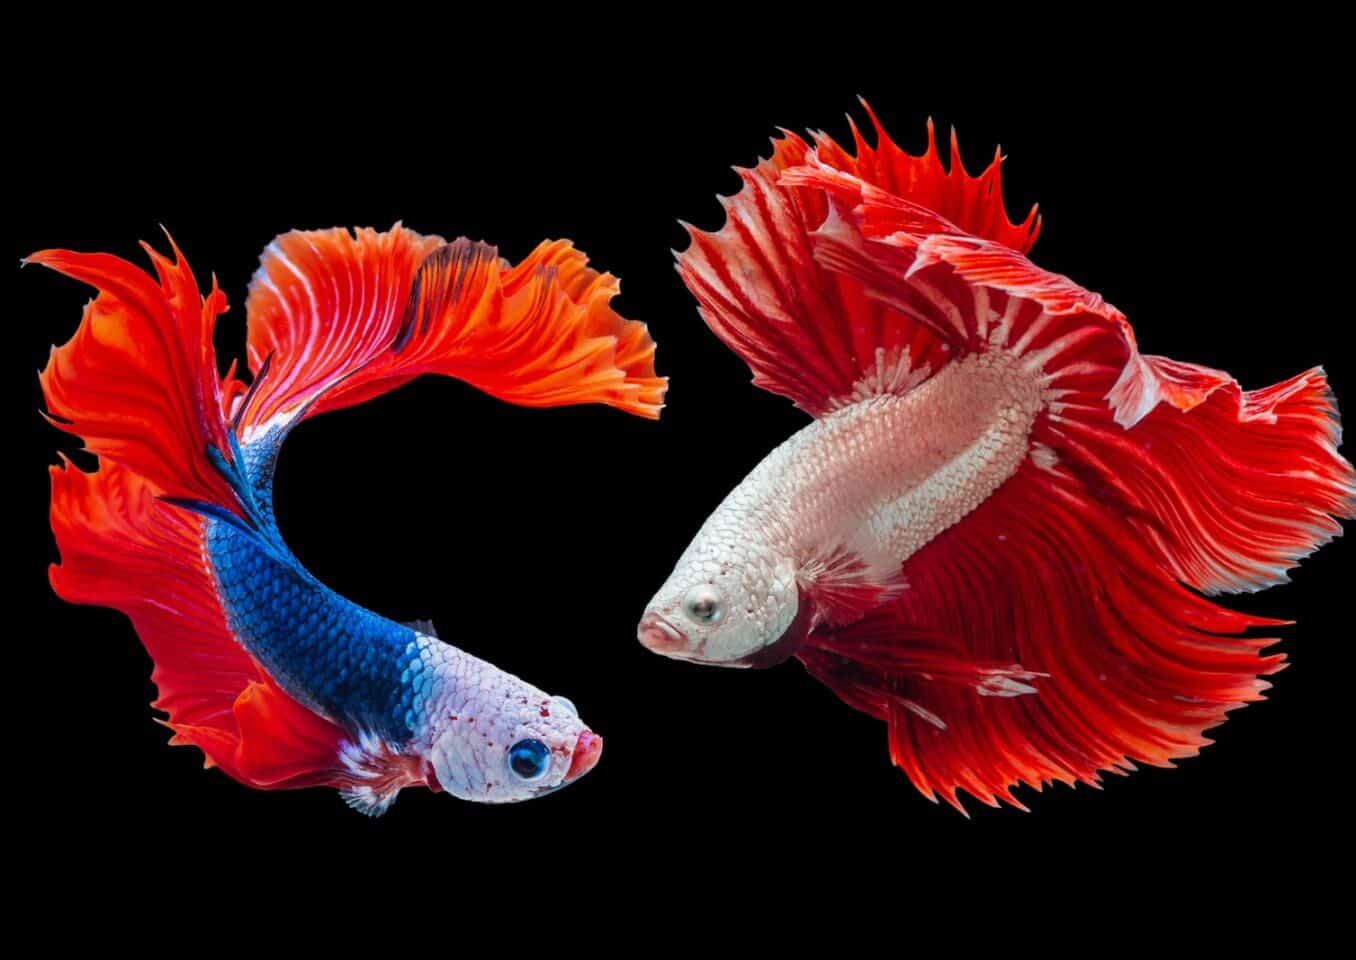 two Siamese fighting betta fishes